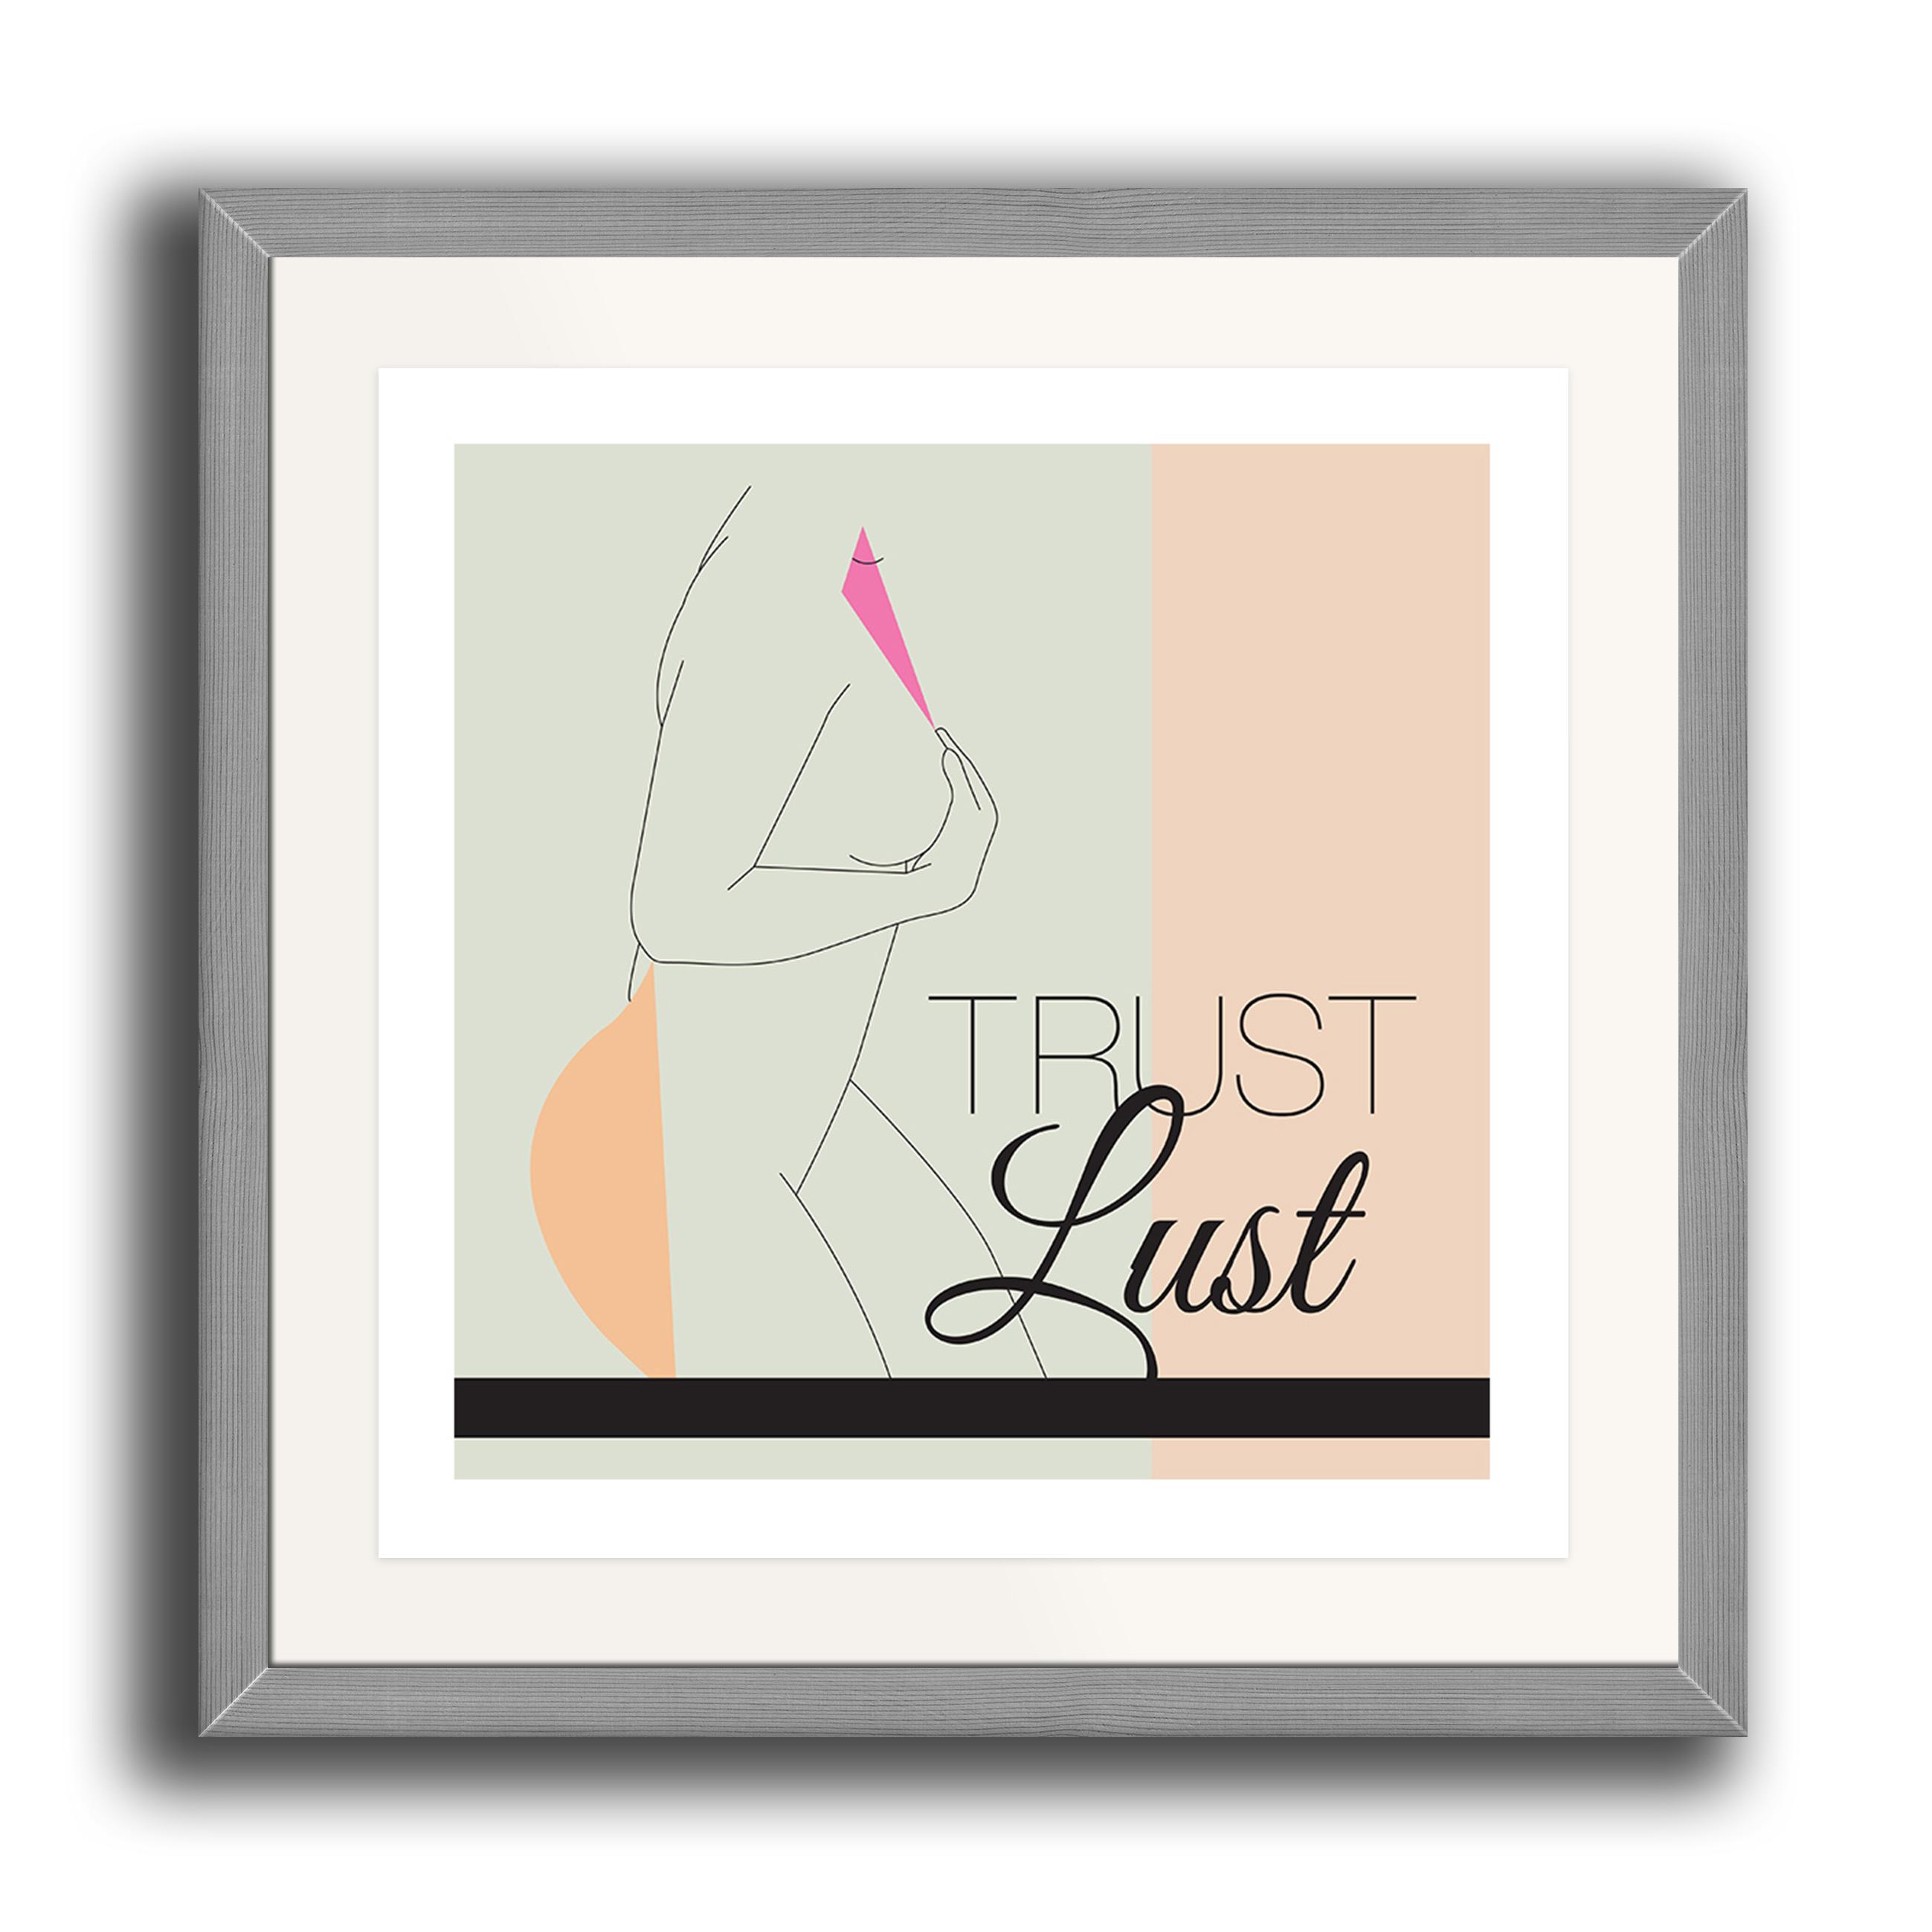 A digital typography inspired print by Clarrie-Anne on eco fine art paper titled Trust Lust showing a line drawing of a naked female with with colour, shapes and typography. The image is set in a grey coloured picture frame.